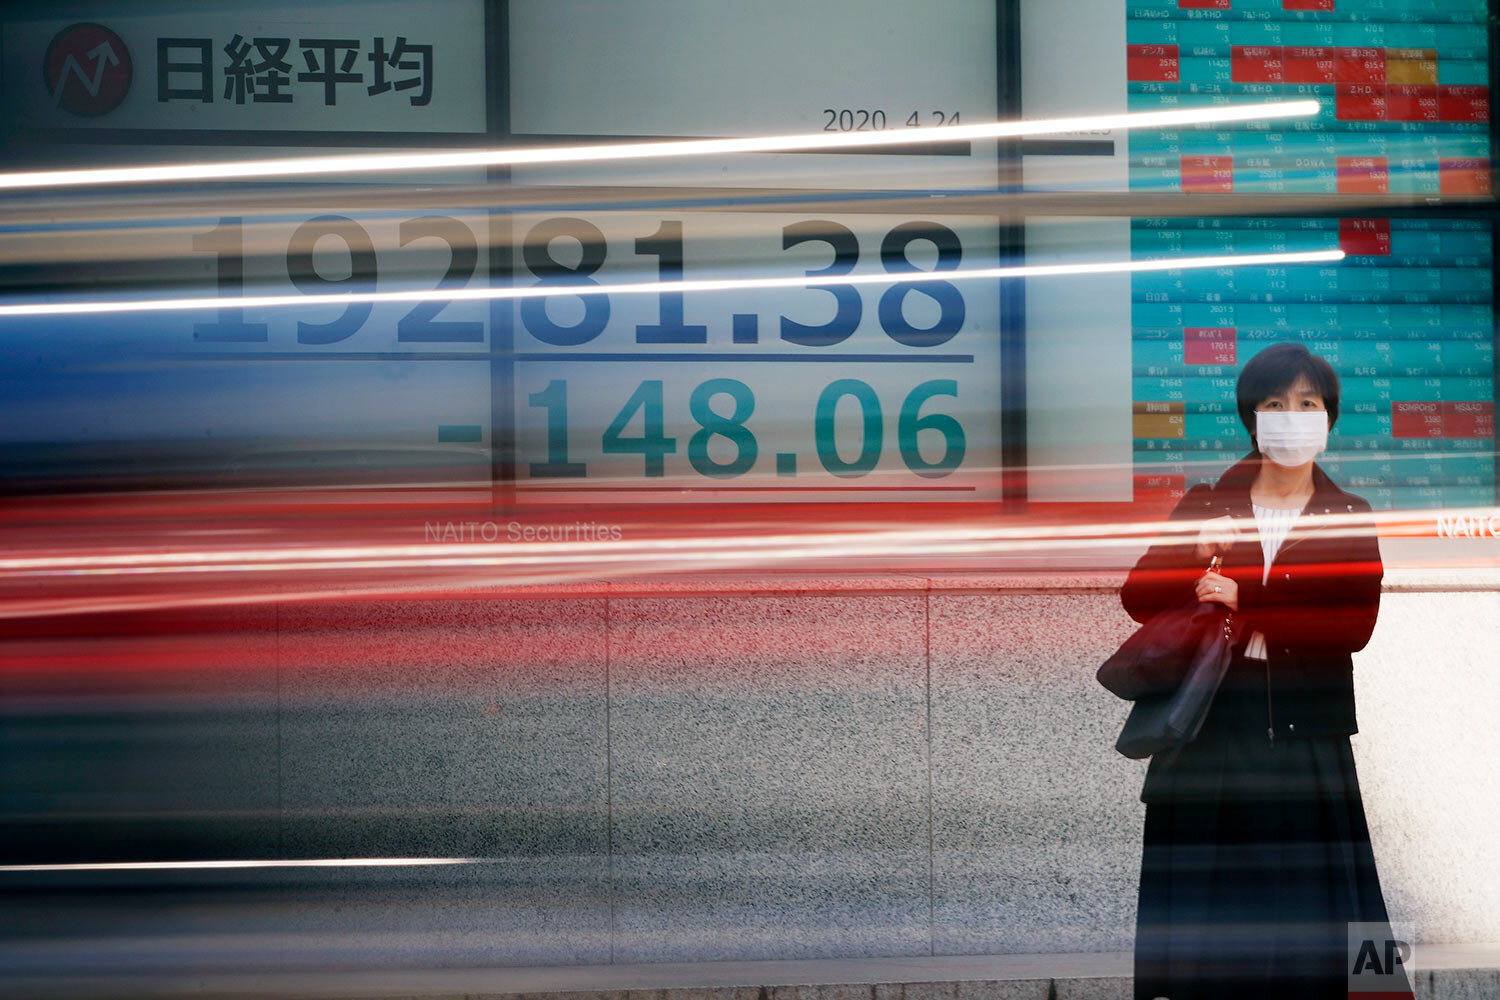  A woman wearing a mask to help stop the spread of the new coronavirus stands near an electronic stock board showing Japan's Nikkei 225 index at a securities firm in Tokyo Friday, April 24, 2020. AP Photo/Eugene Hoshiko) 